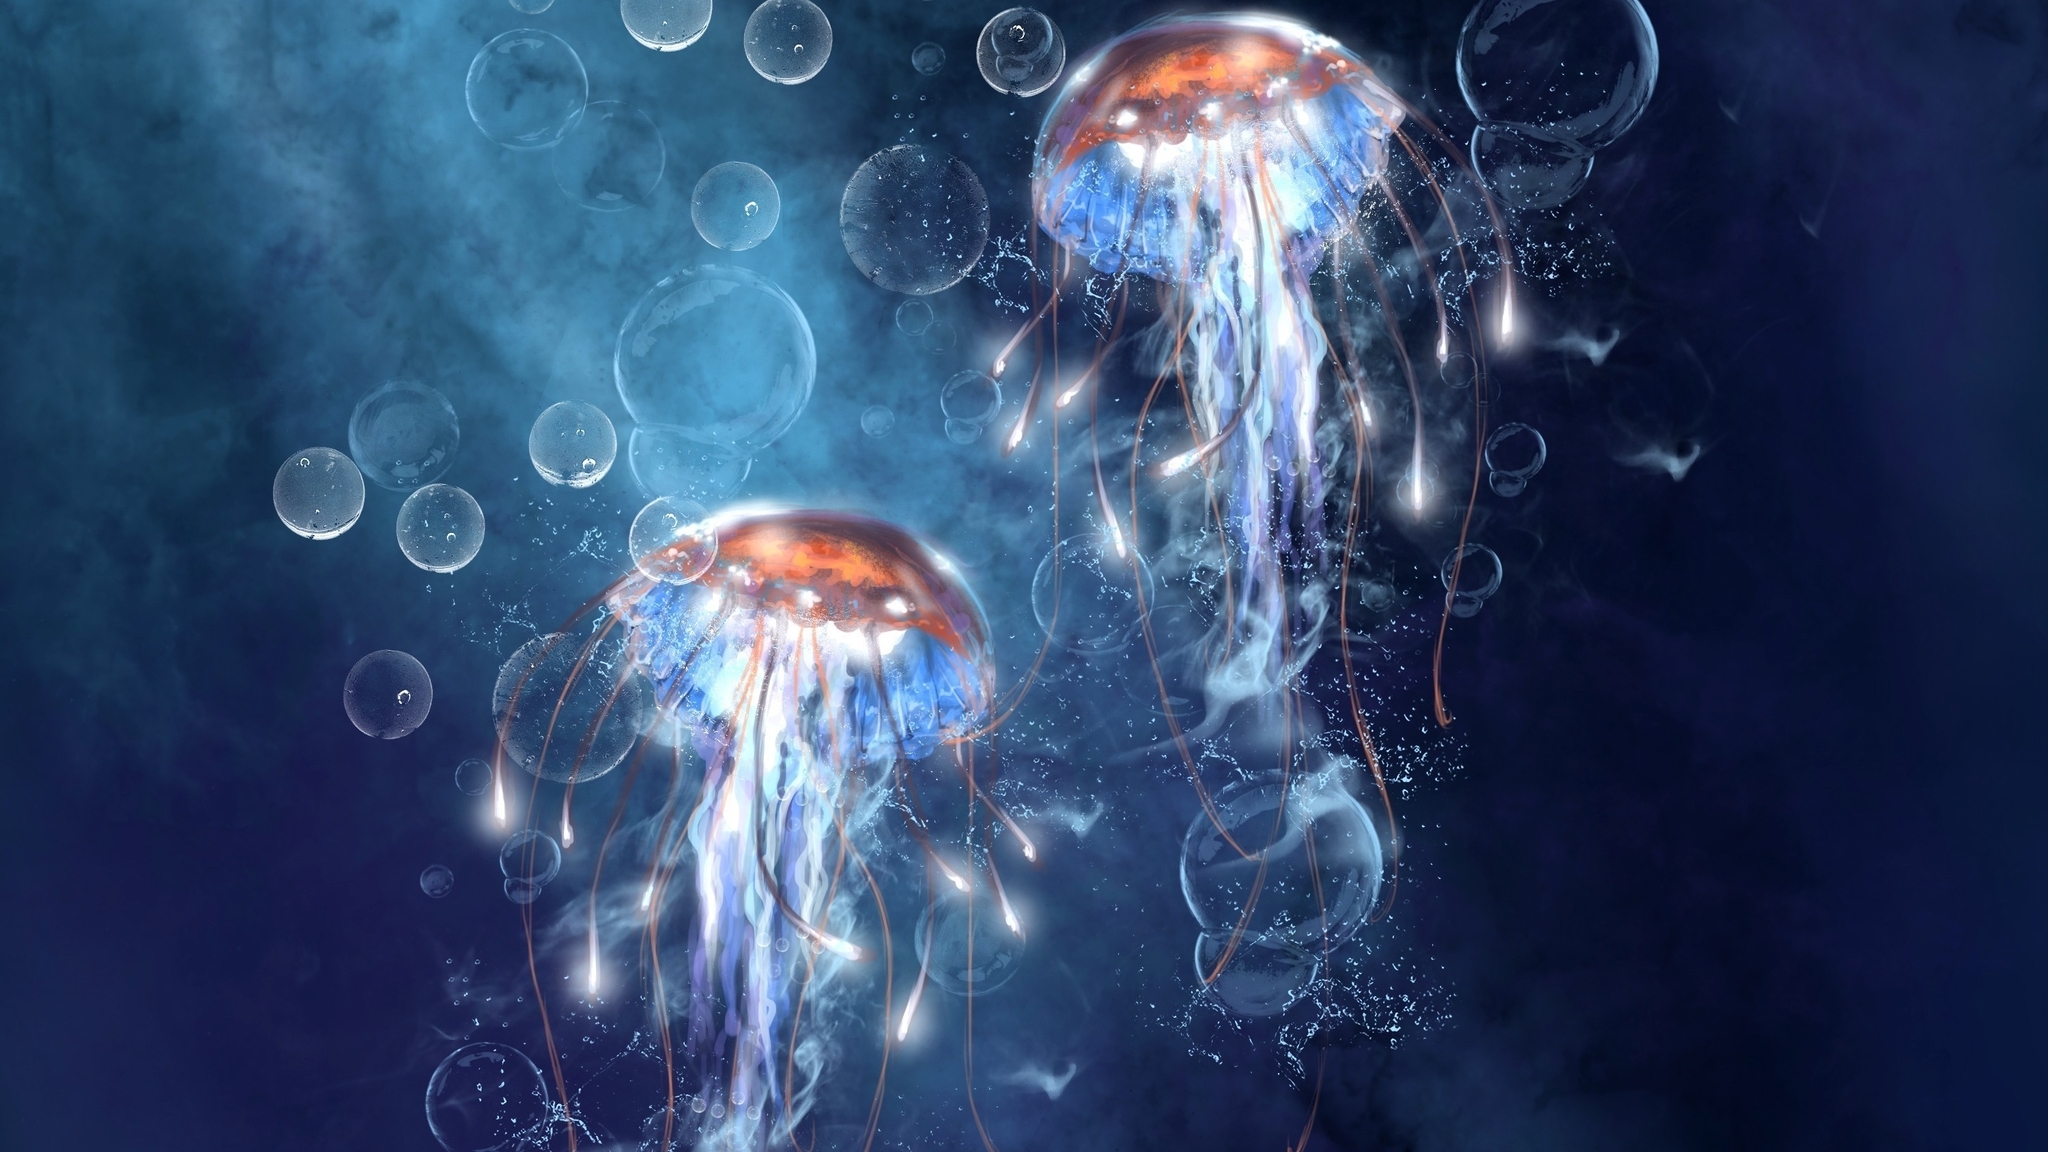 Image: Jellyfish, bubbles, tentacles